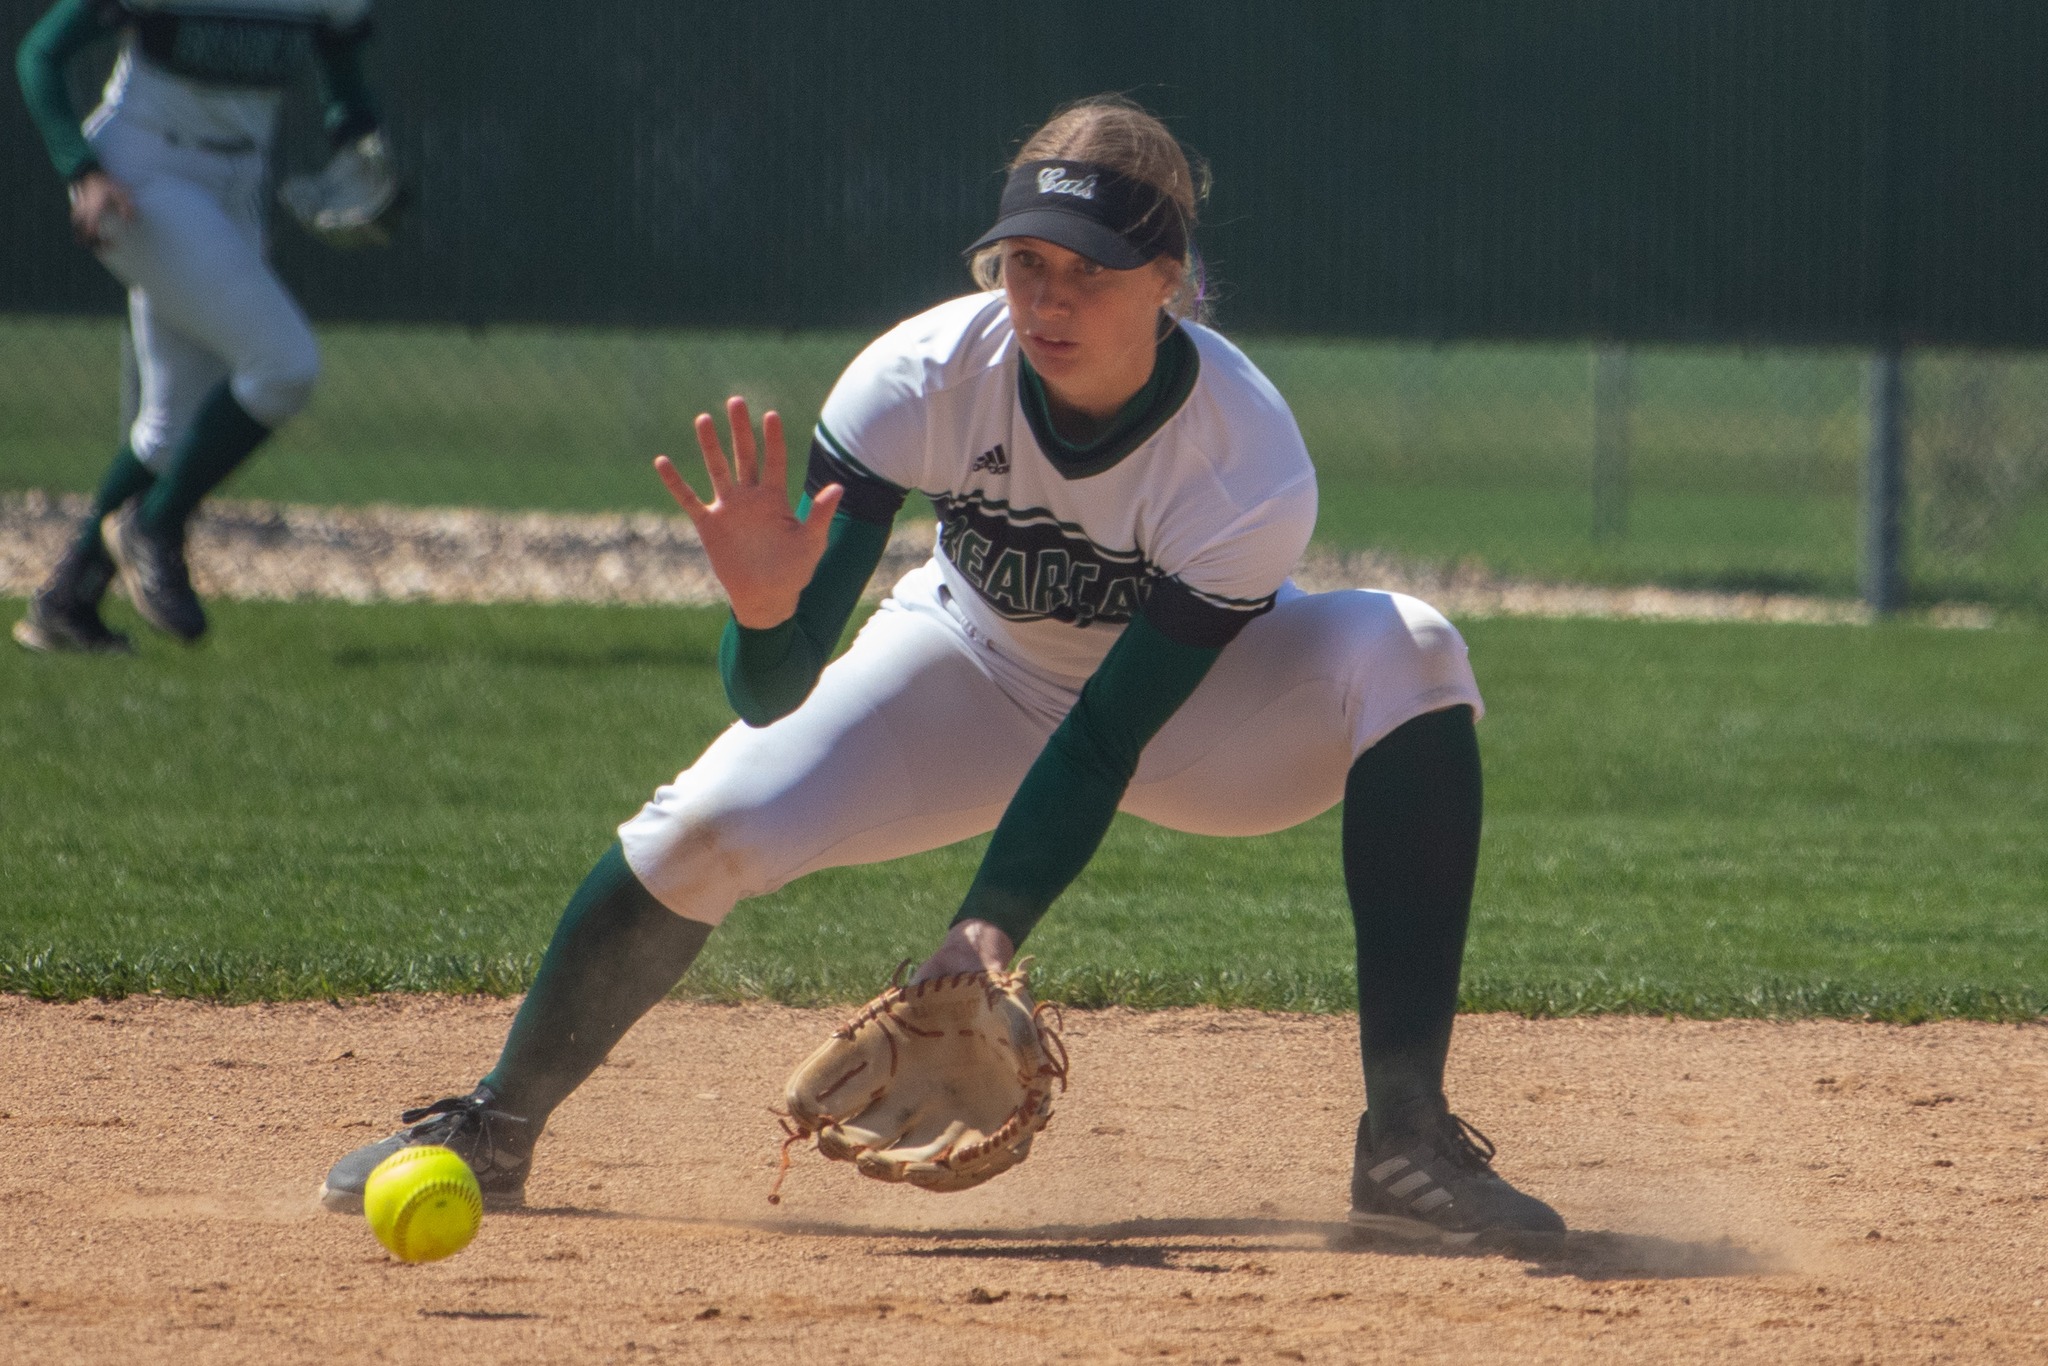 Northwest Missouri State can lock up the No. 5 seed in the MIAA Tournament this weekend.